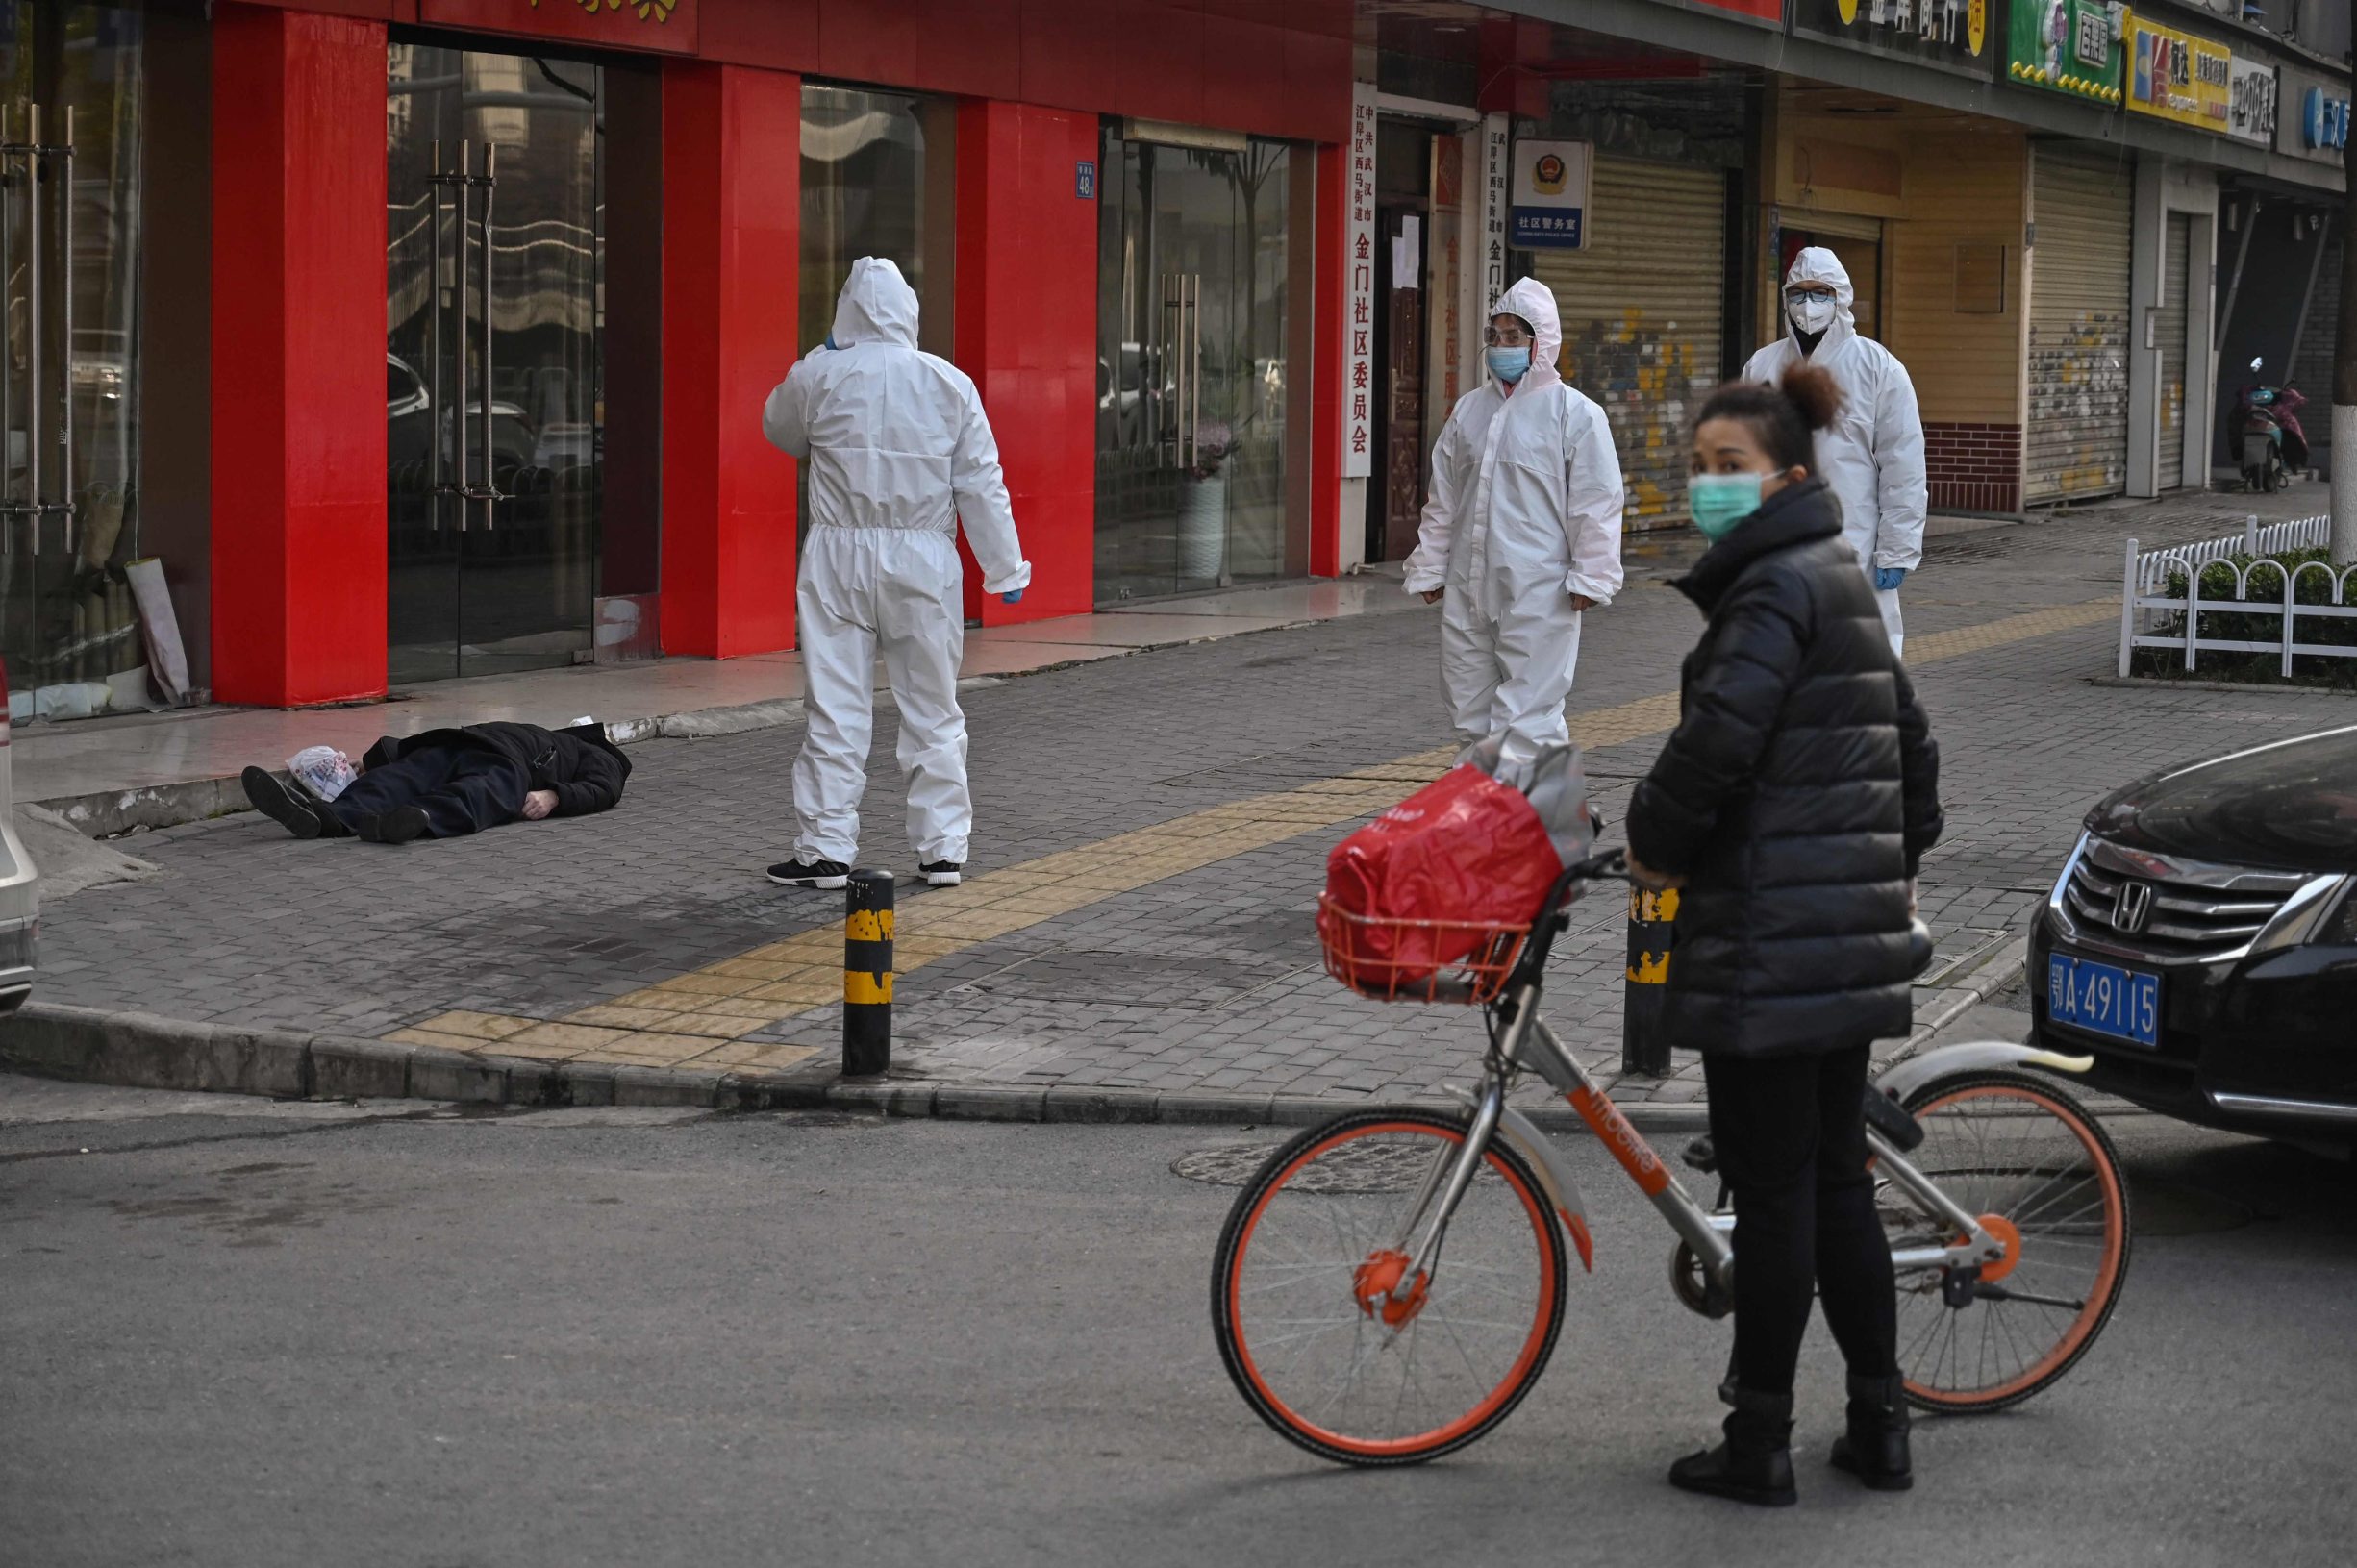 This photo taken on January 30, 2020 shows officials in protective suits checking on an elderly man wearing a facemask who collapsed and died on a street near a hospital in Wuhan. - AFP journalists saw the body on January 30, not long before an emergency vehicle arrived carrying police and medical staff in full-body protective suits. The World Health Organization declared a global emergency over the new coronavirus, as China reported on January 31 the death toll had climbed to 213 with nearly 10,000 infections. (Photo by Hector RETAMAL / AFP) / TO GO WITH China-health-virus-death,SCENE by Leo RAMIREZ and Sebastien RICCI